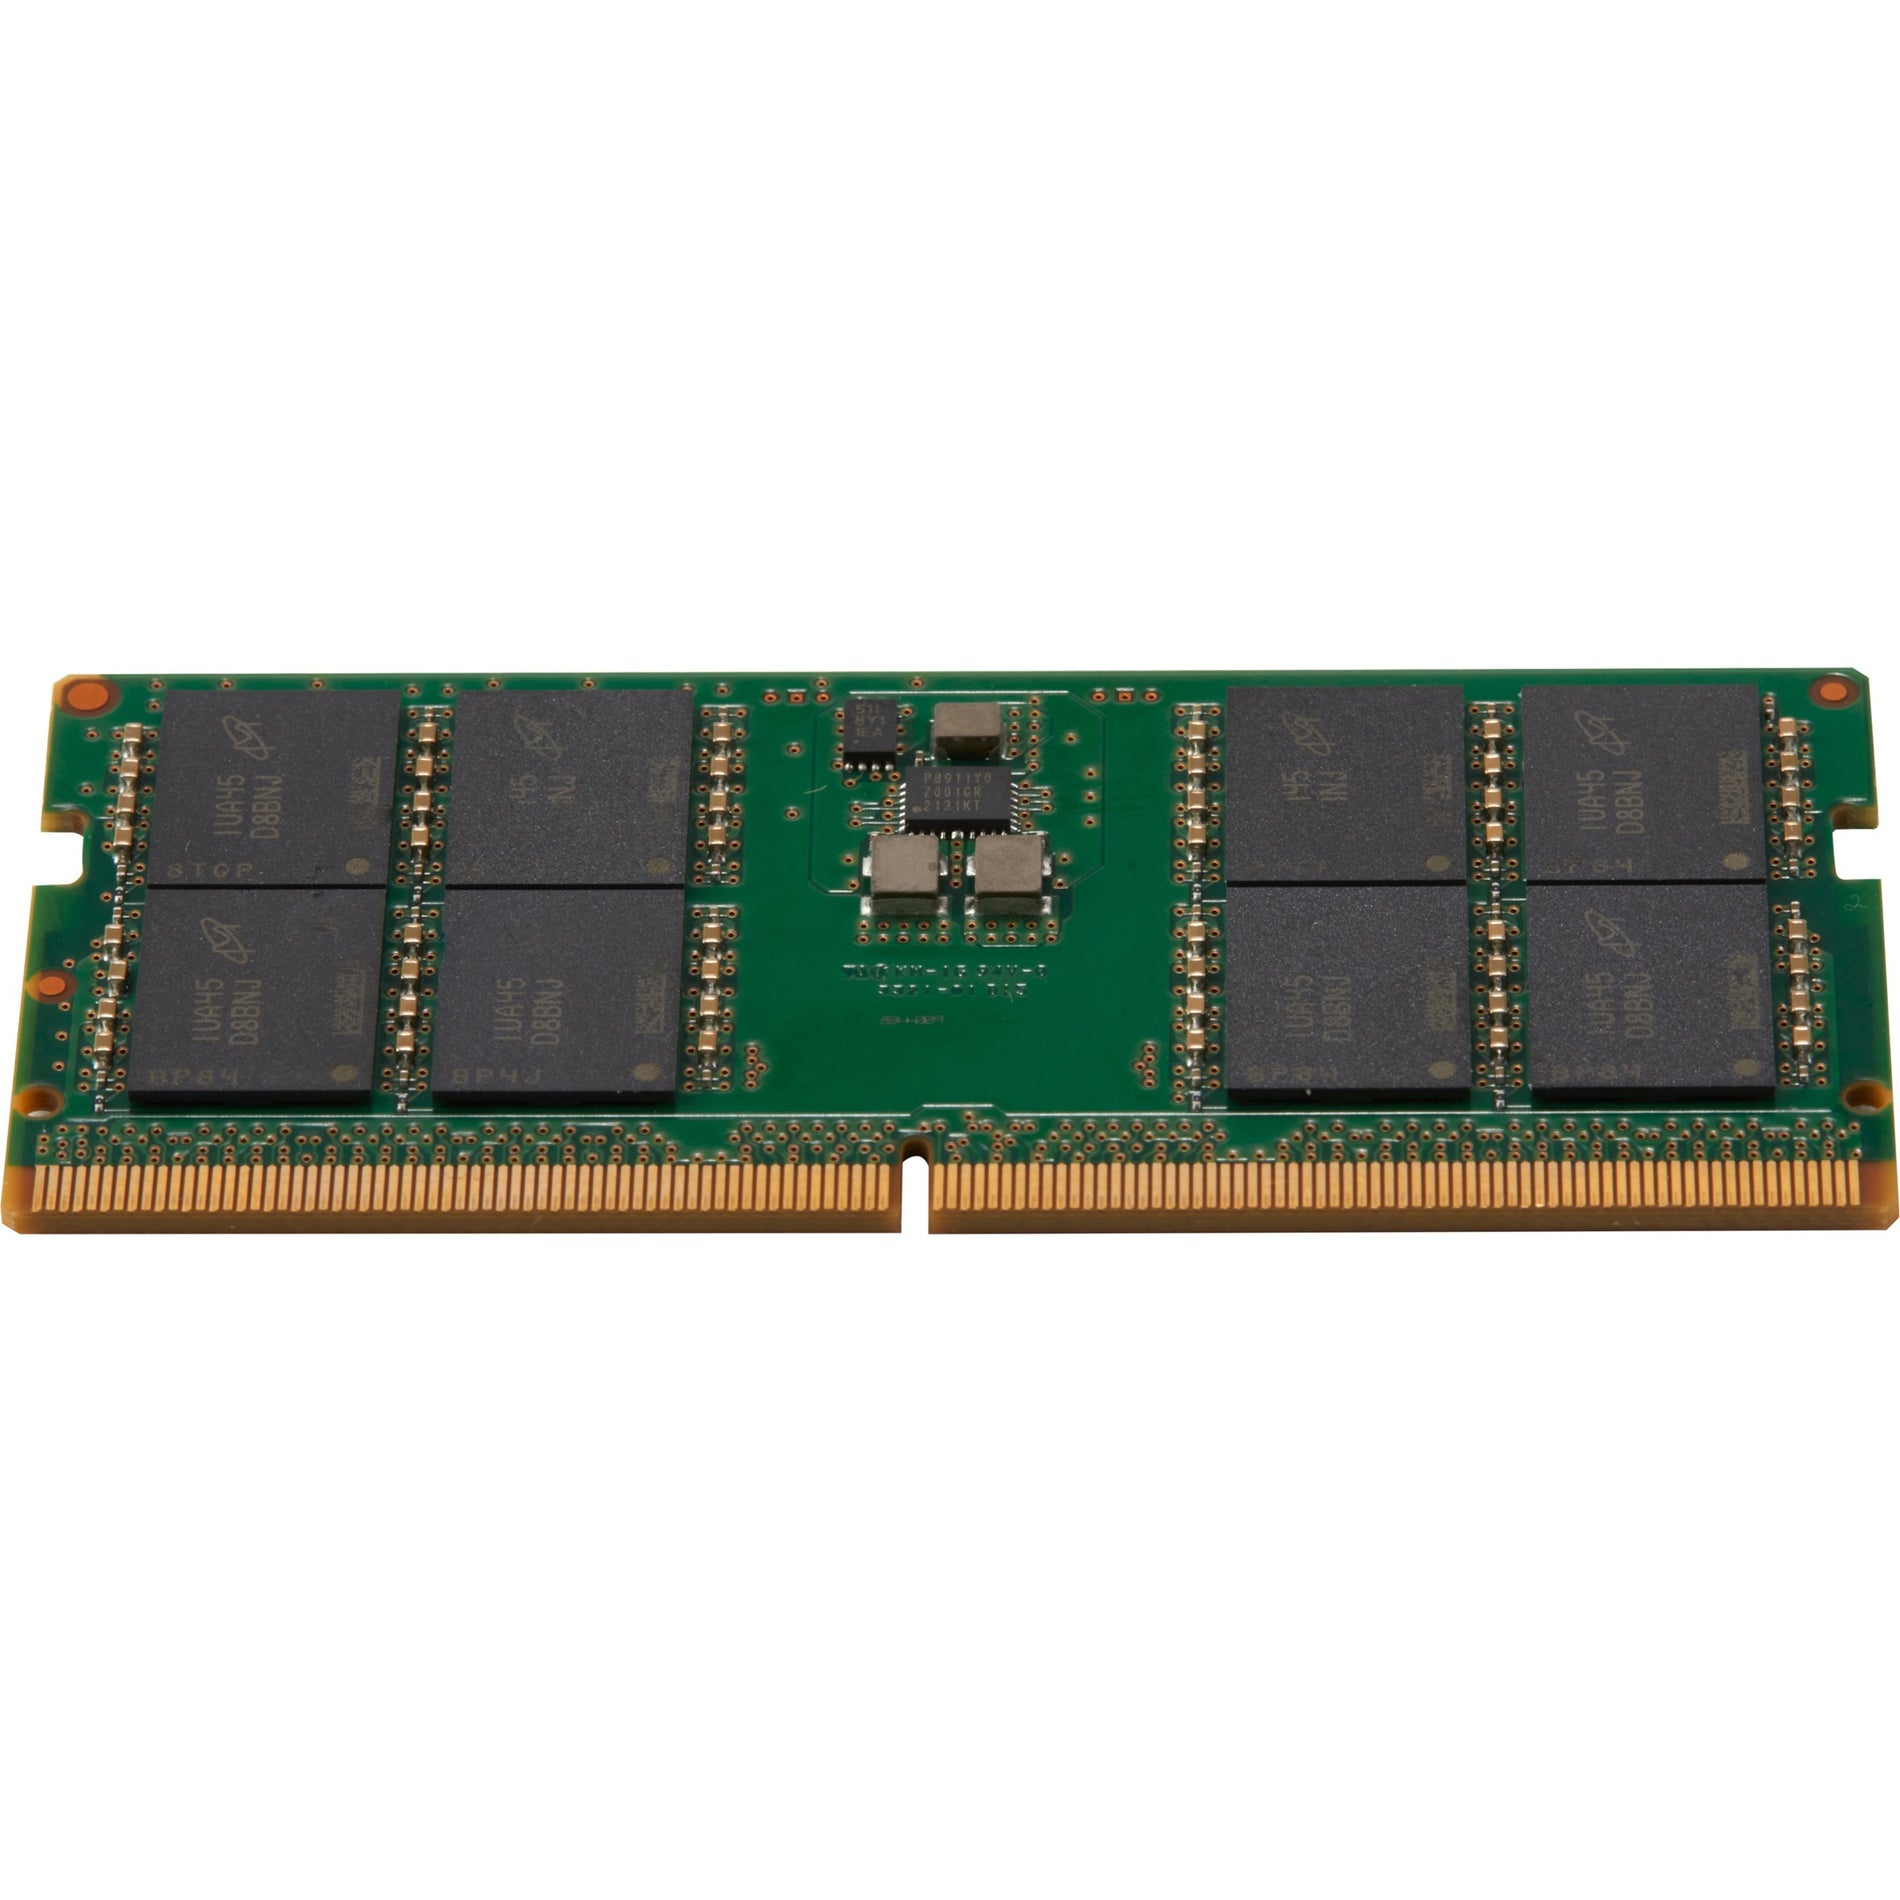 HP 32GB DDR5 SDRAM Memory Module - Boost Your System's Performance (5S4C0UT#ABA) [Discontinued]